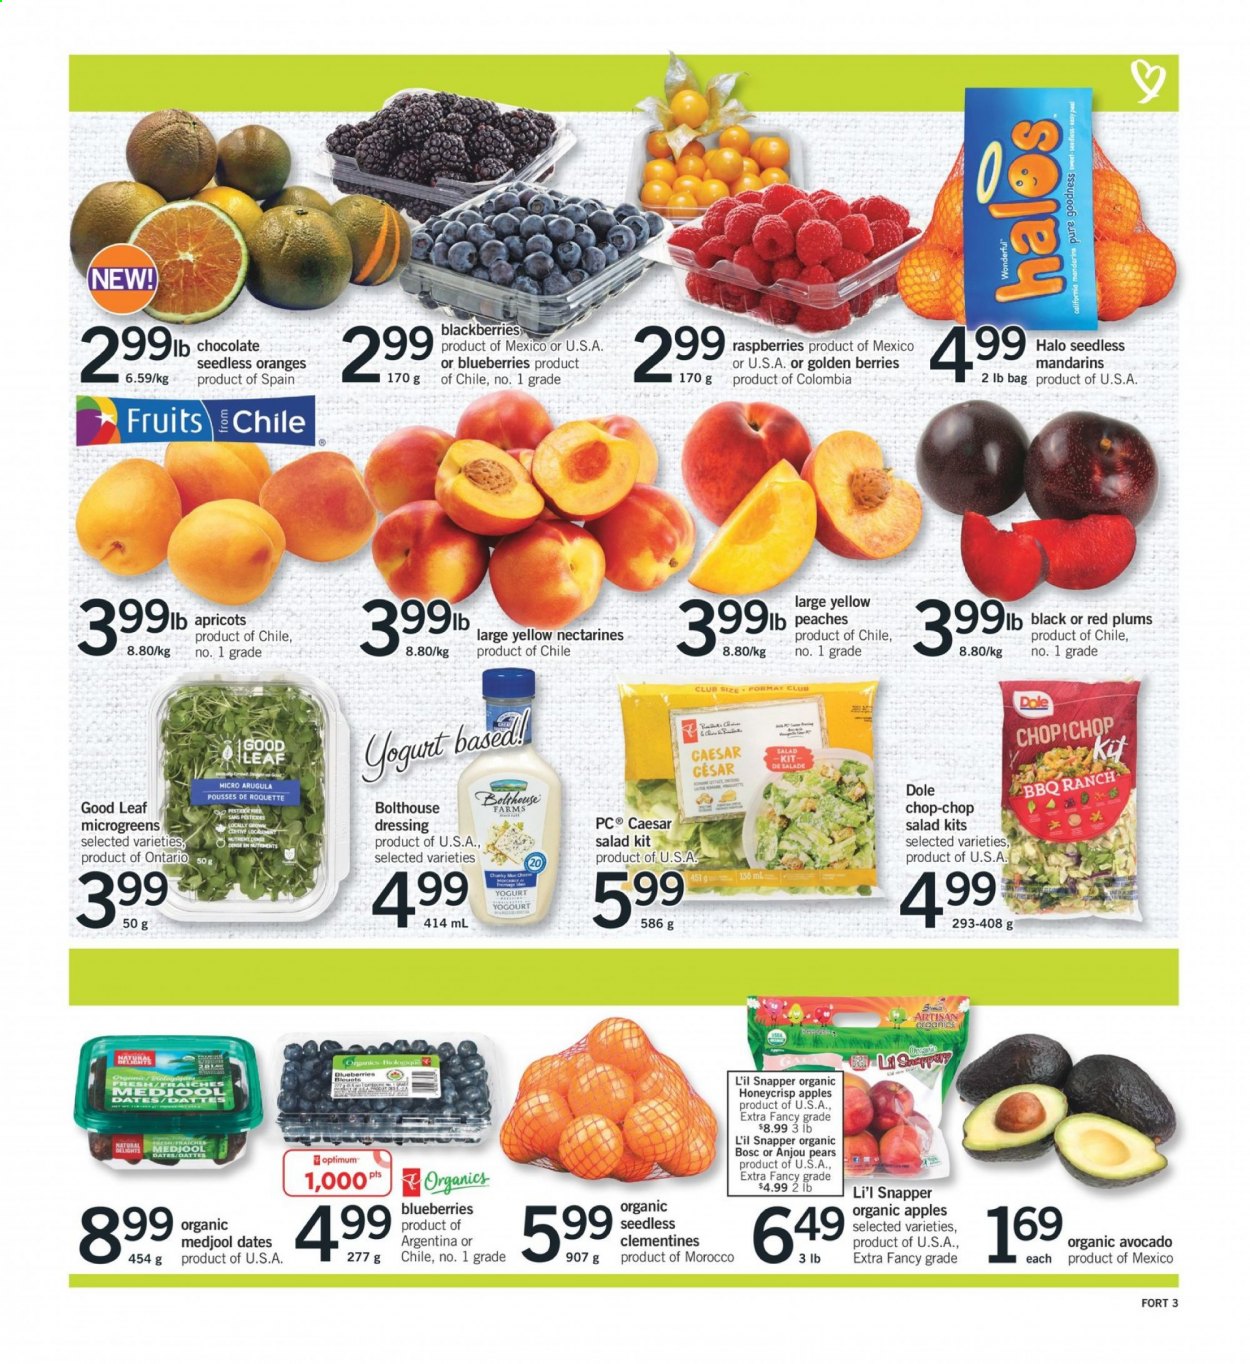 thumbnail - Fortinos Flyer - January 21, 2021 - January 27, 2021 - Sales products - arugula, salad, Dole, apples, avocado, blackberries, blueberries, clementines, mandarines, nectarines, plums, pears, red plums, apricots, peaches, yoghurt, chocolate, dressing, dried dates, Optimum. Page 3.